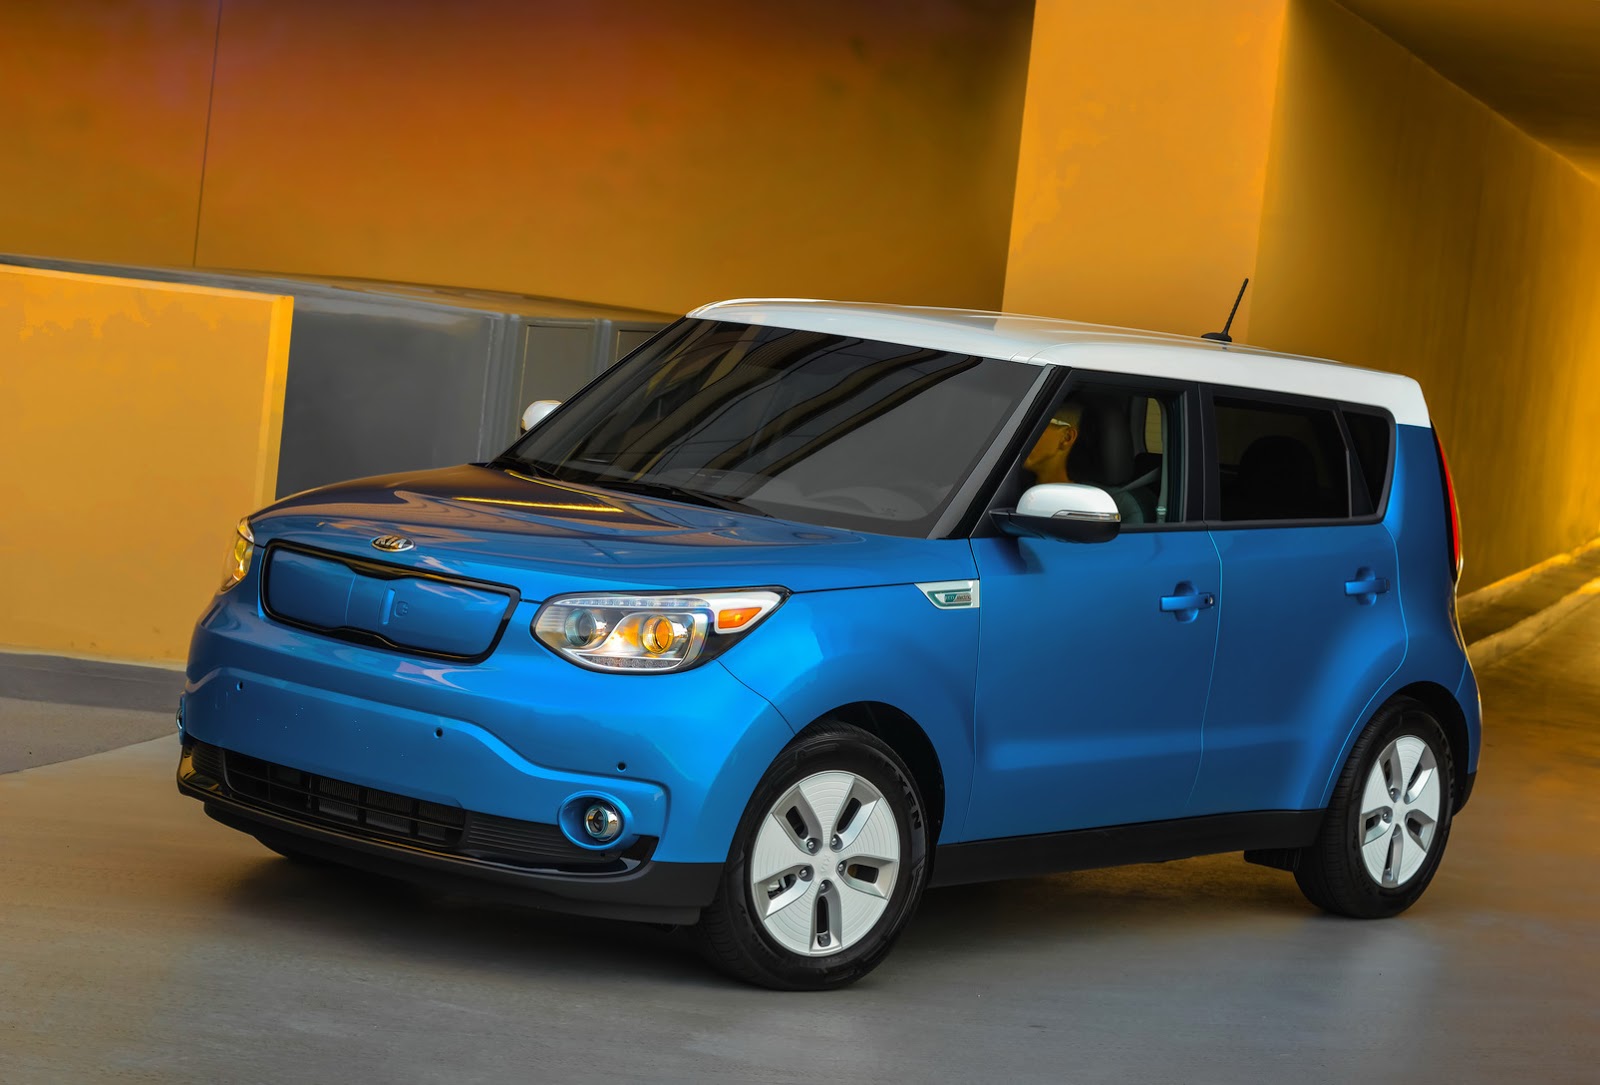 New Electric 2015 Kia Soul From 33 700 Sans 7 500 Tax Rebate Carscoops